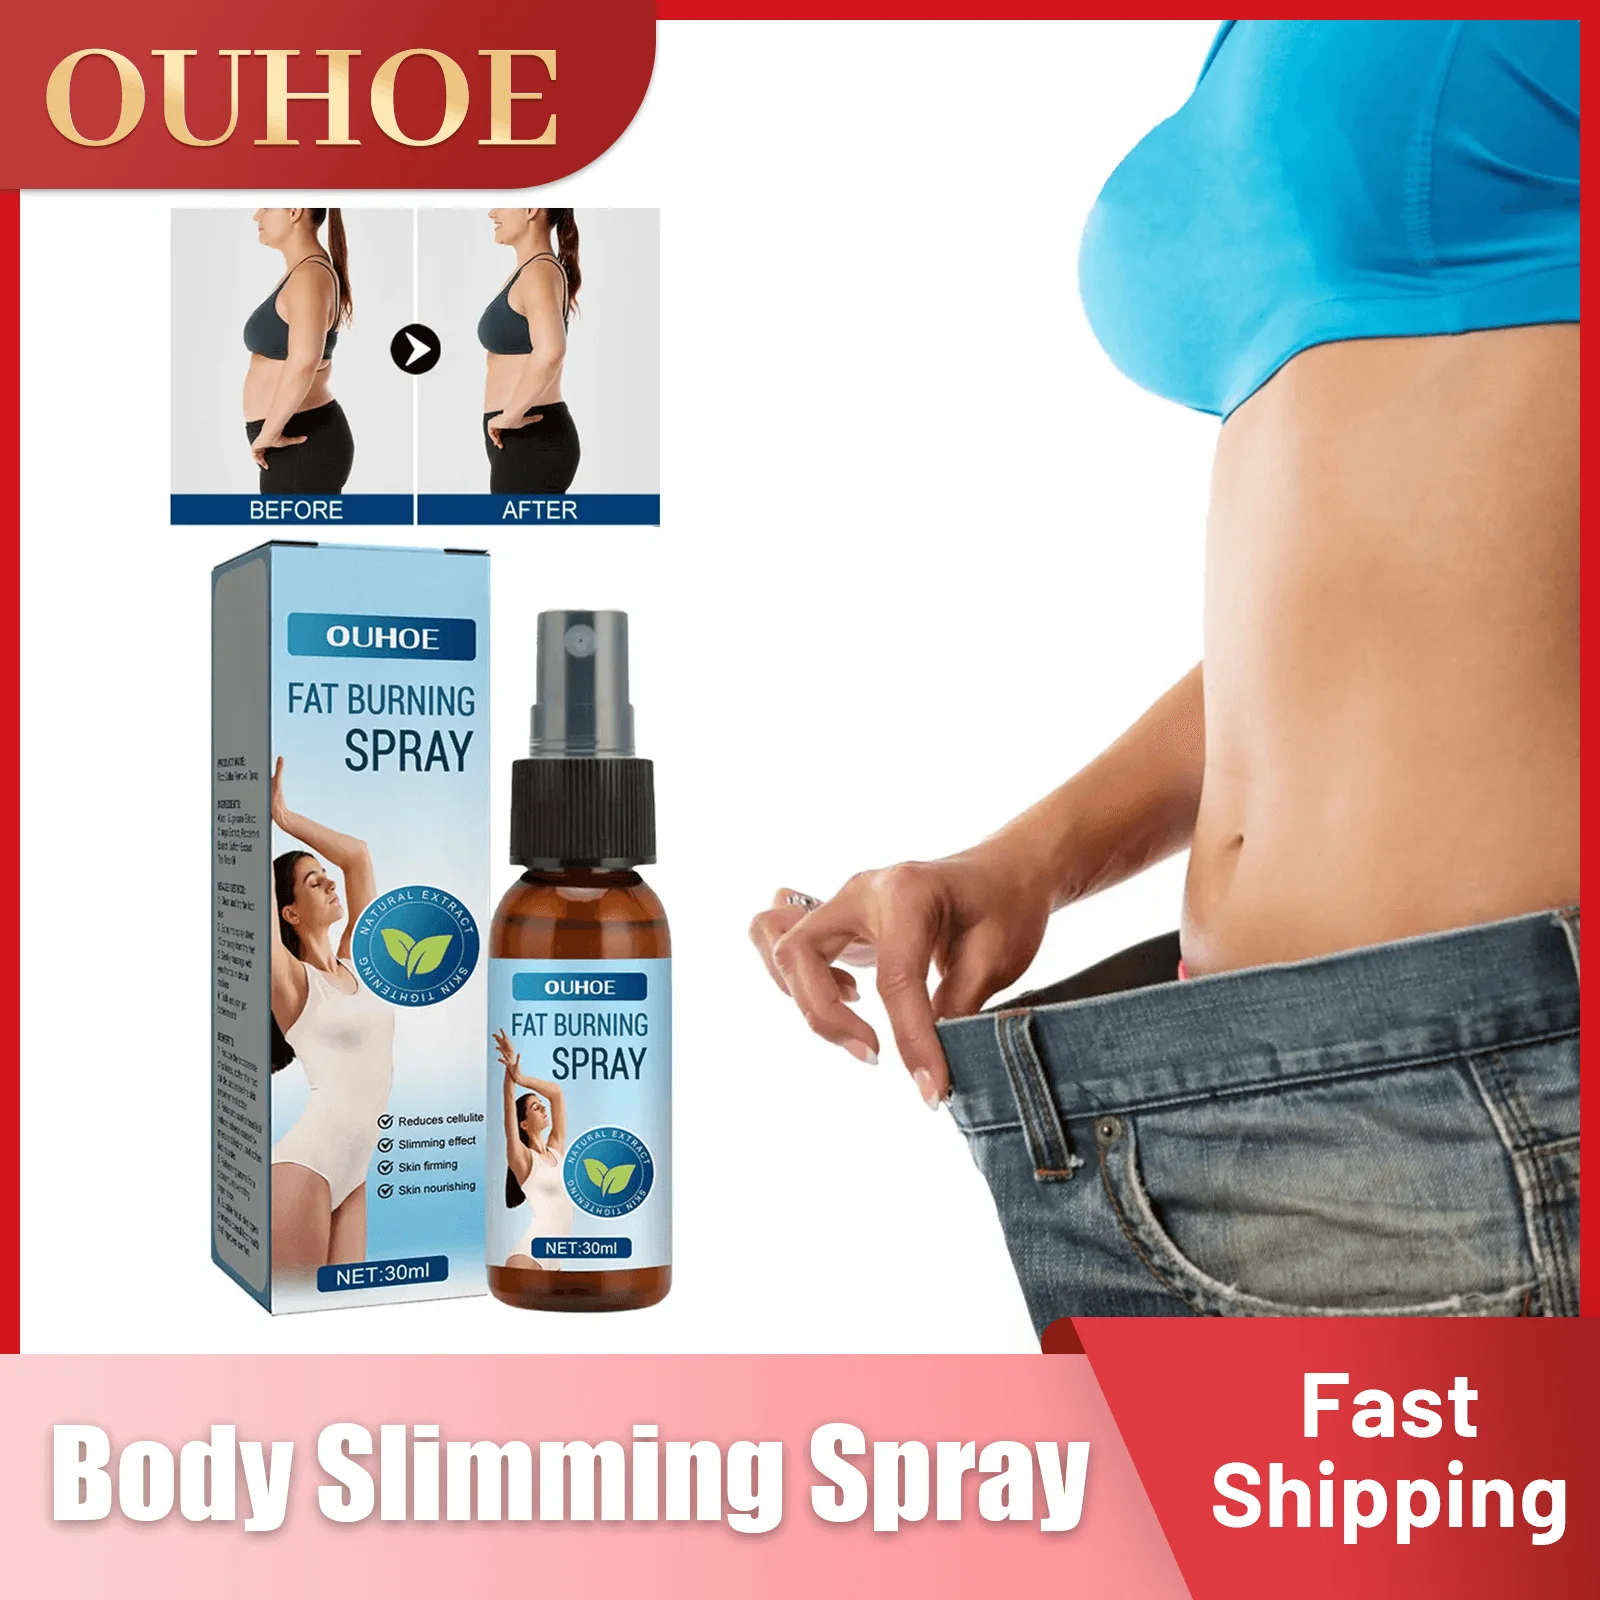 

Fat Burning Spray for Belly Fat Weight Loss Reduce Cellulite Tummy Control Detox Shaping Firming Sculpting Body Slimming Spray